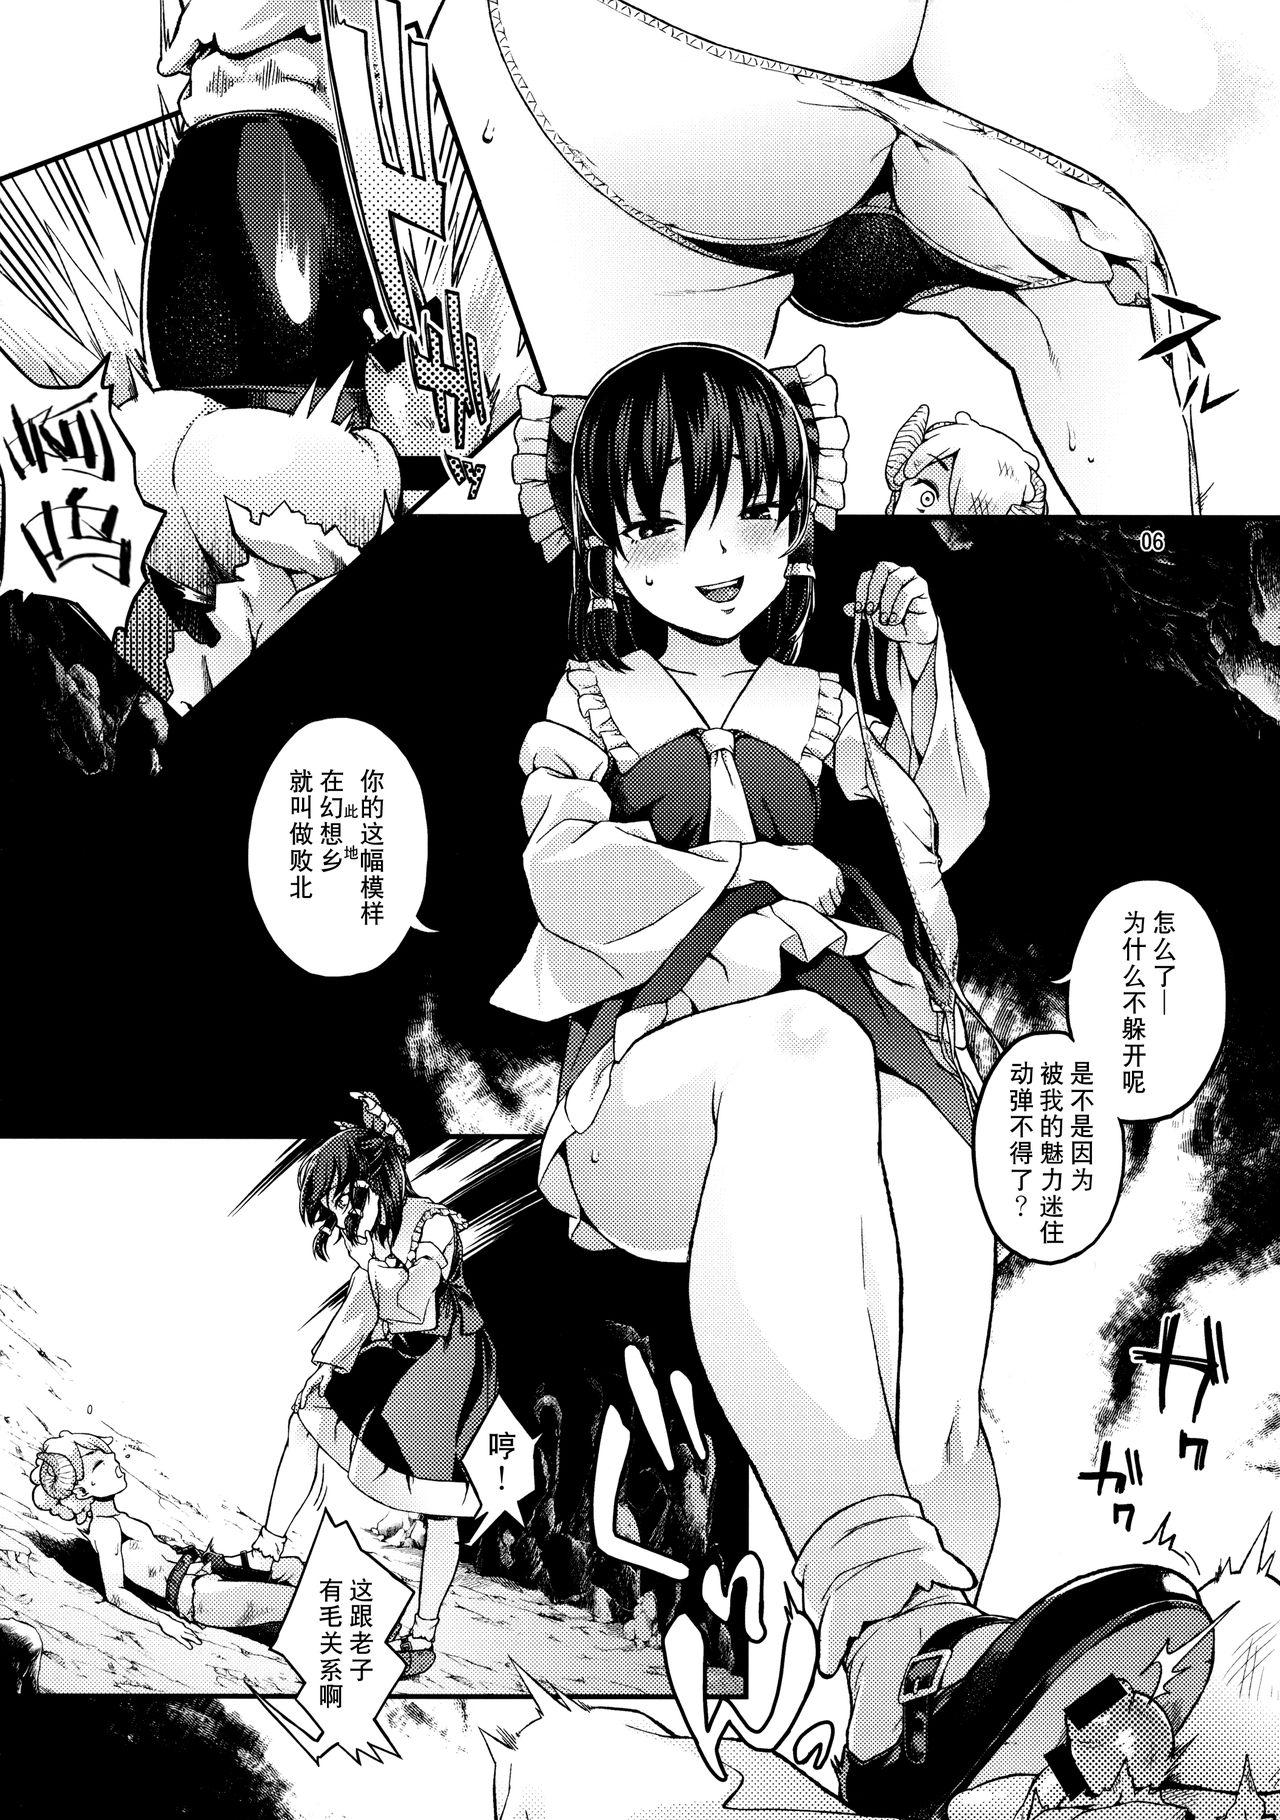 Mms Gensoukyou no H na Himitsu - Touhou project Transsexual - Page 5